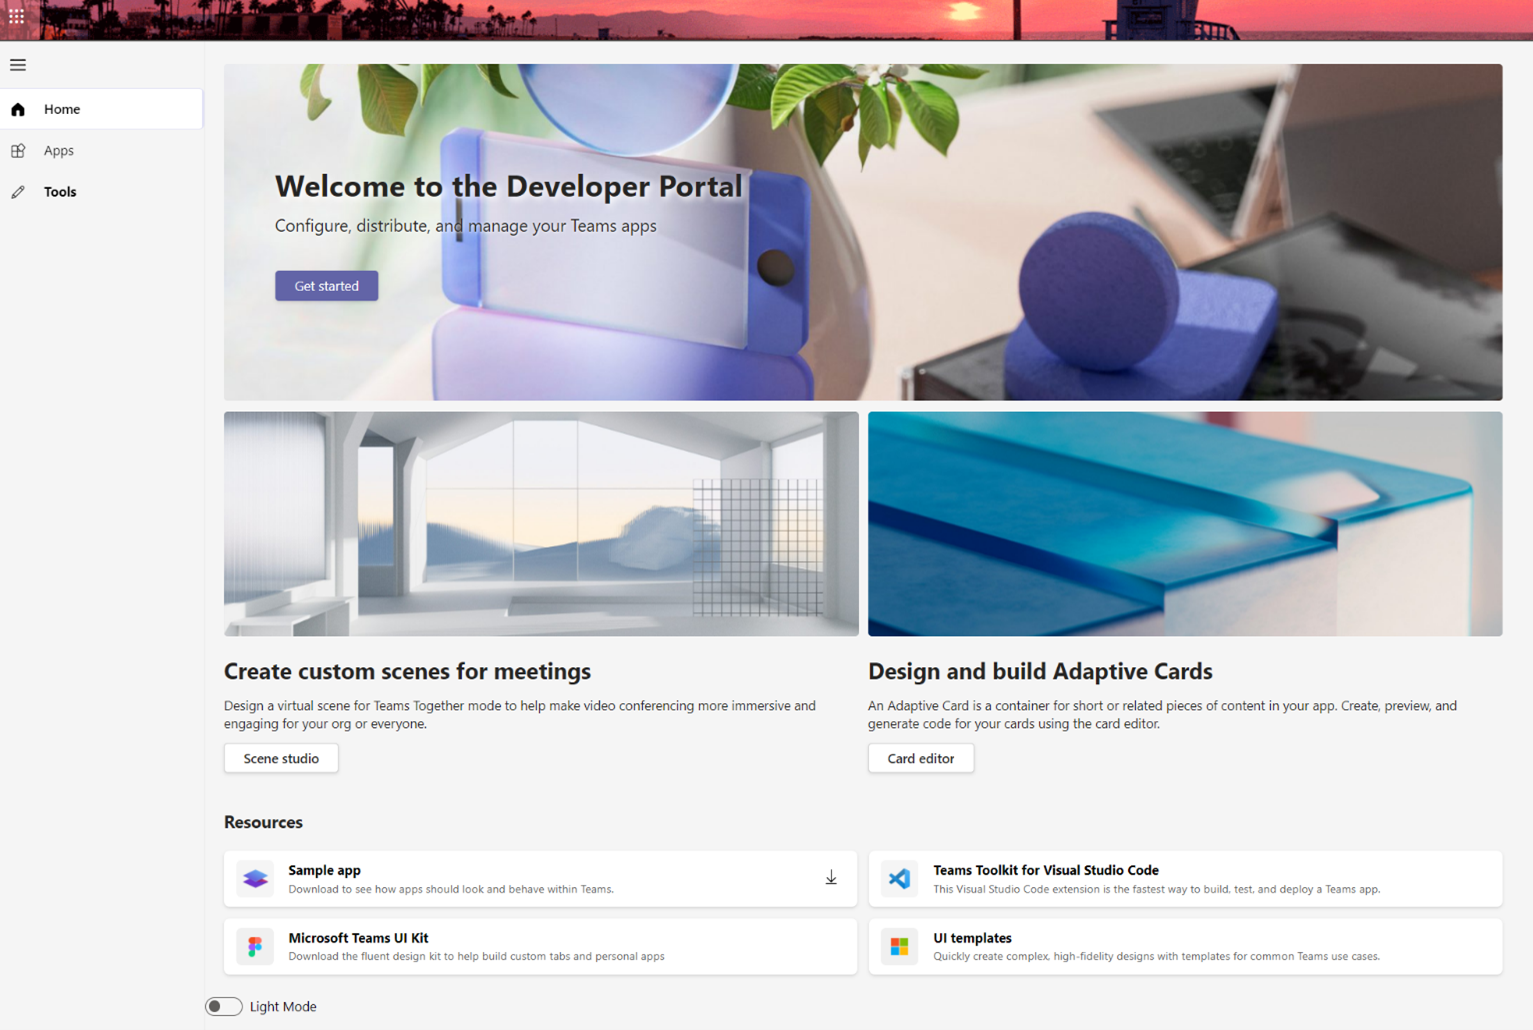 Build 2021: Microsoft Teams adds a Developer portal, available now - OnMSFT.com - May 25, 2021